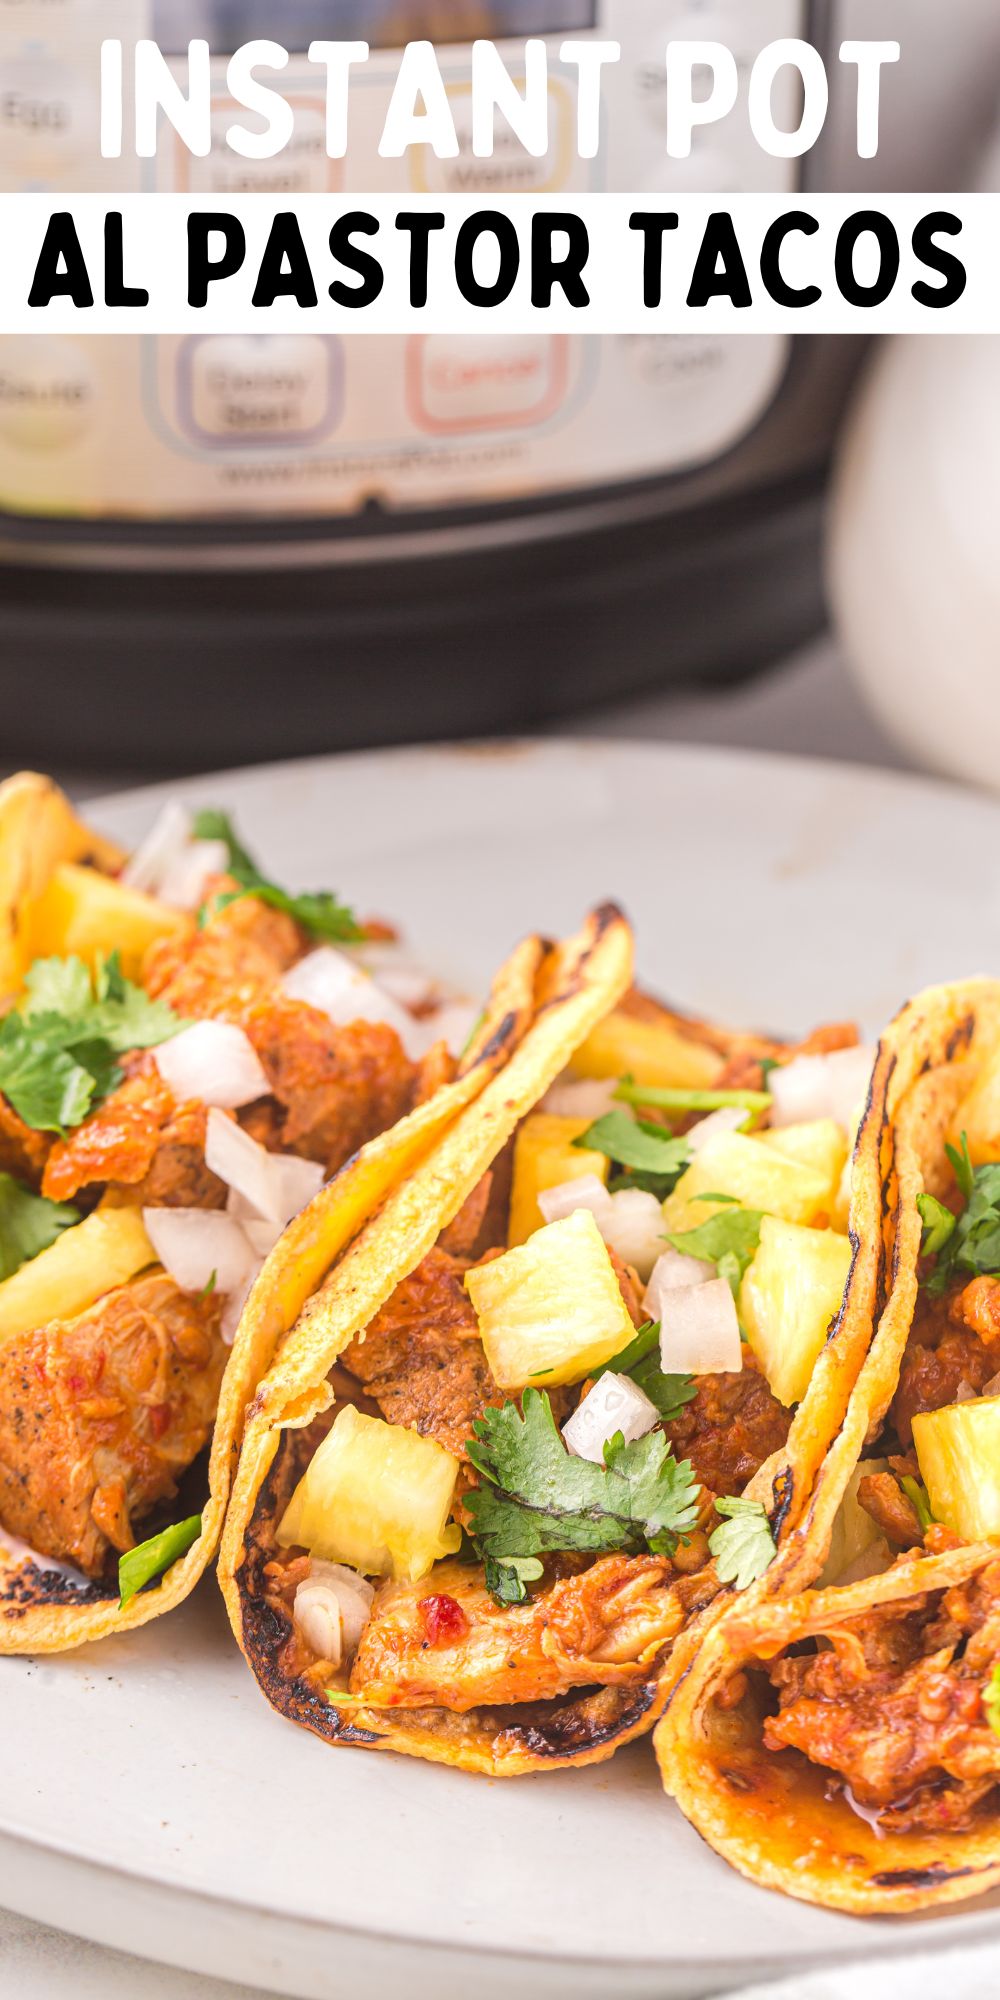 This Instant Pot Al Pastor Tacos recipe combines marinated pork with traditional Mexican spices, and is cooked to perfection in the Instant Pot. via @familyfresh